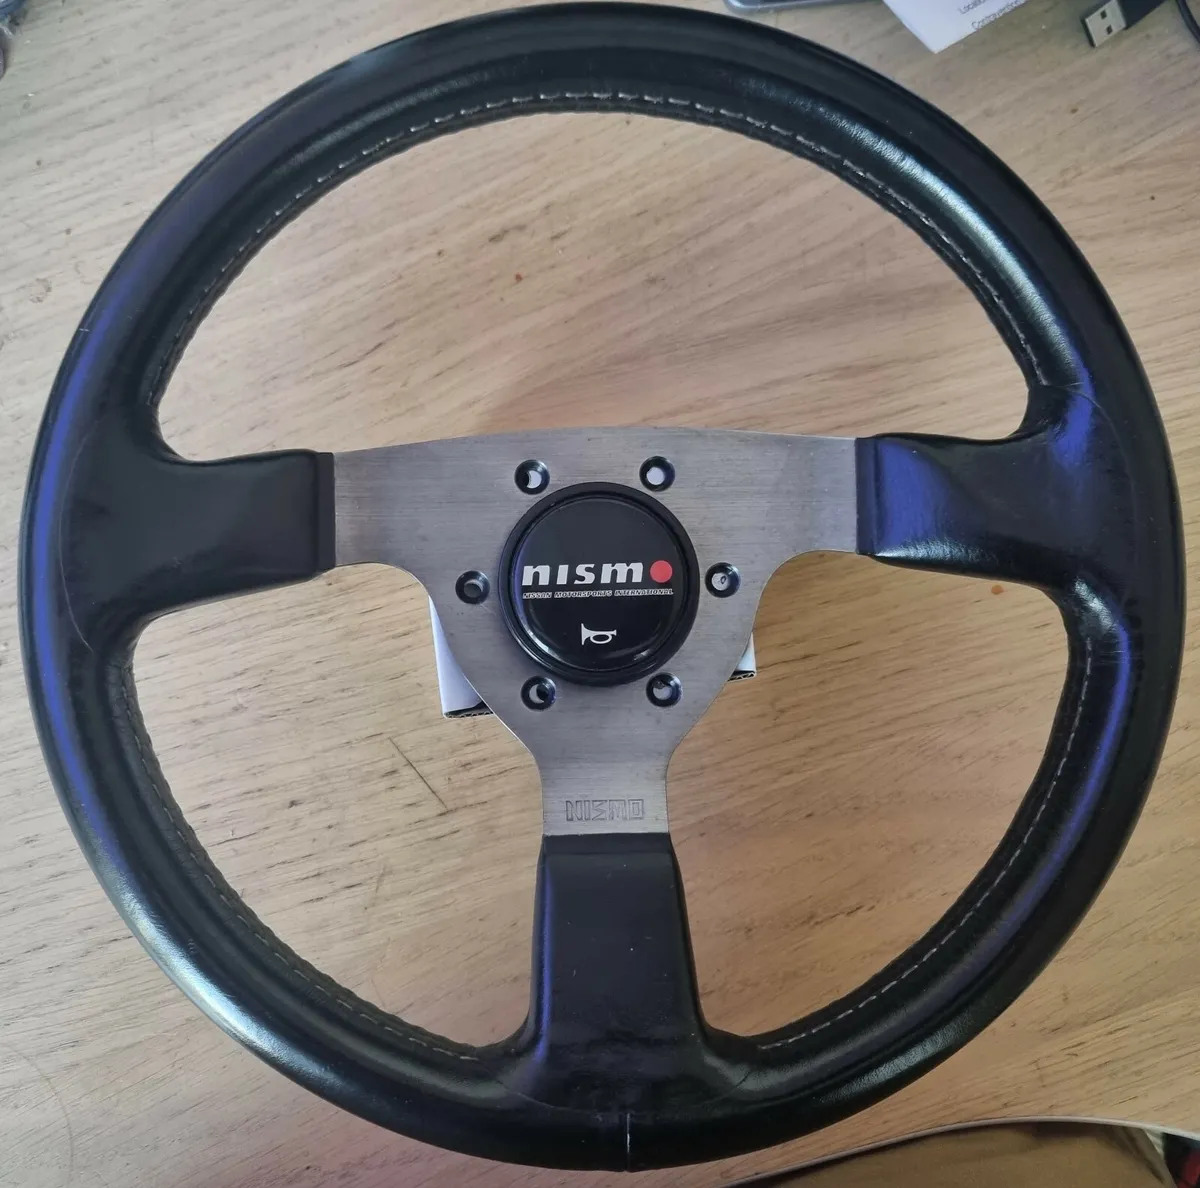 Which Racing Wheel Did GT Nismo Use?